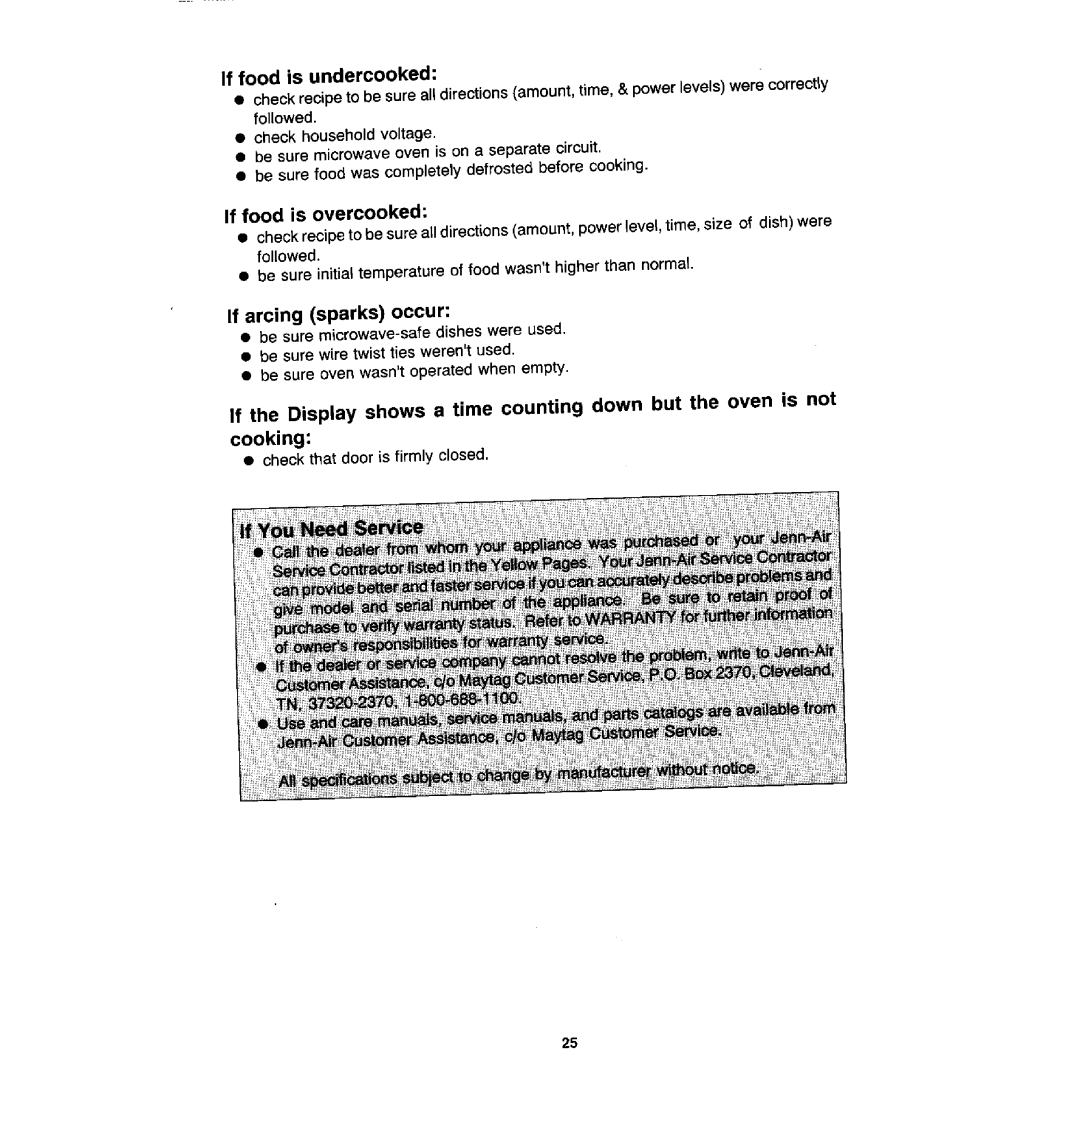 Jenn-Air M170 manual If food is undercooked, If arcing sparks occur, If food is overcooked 